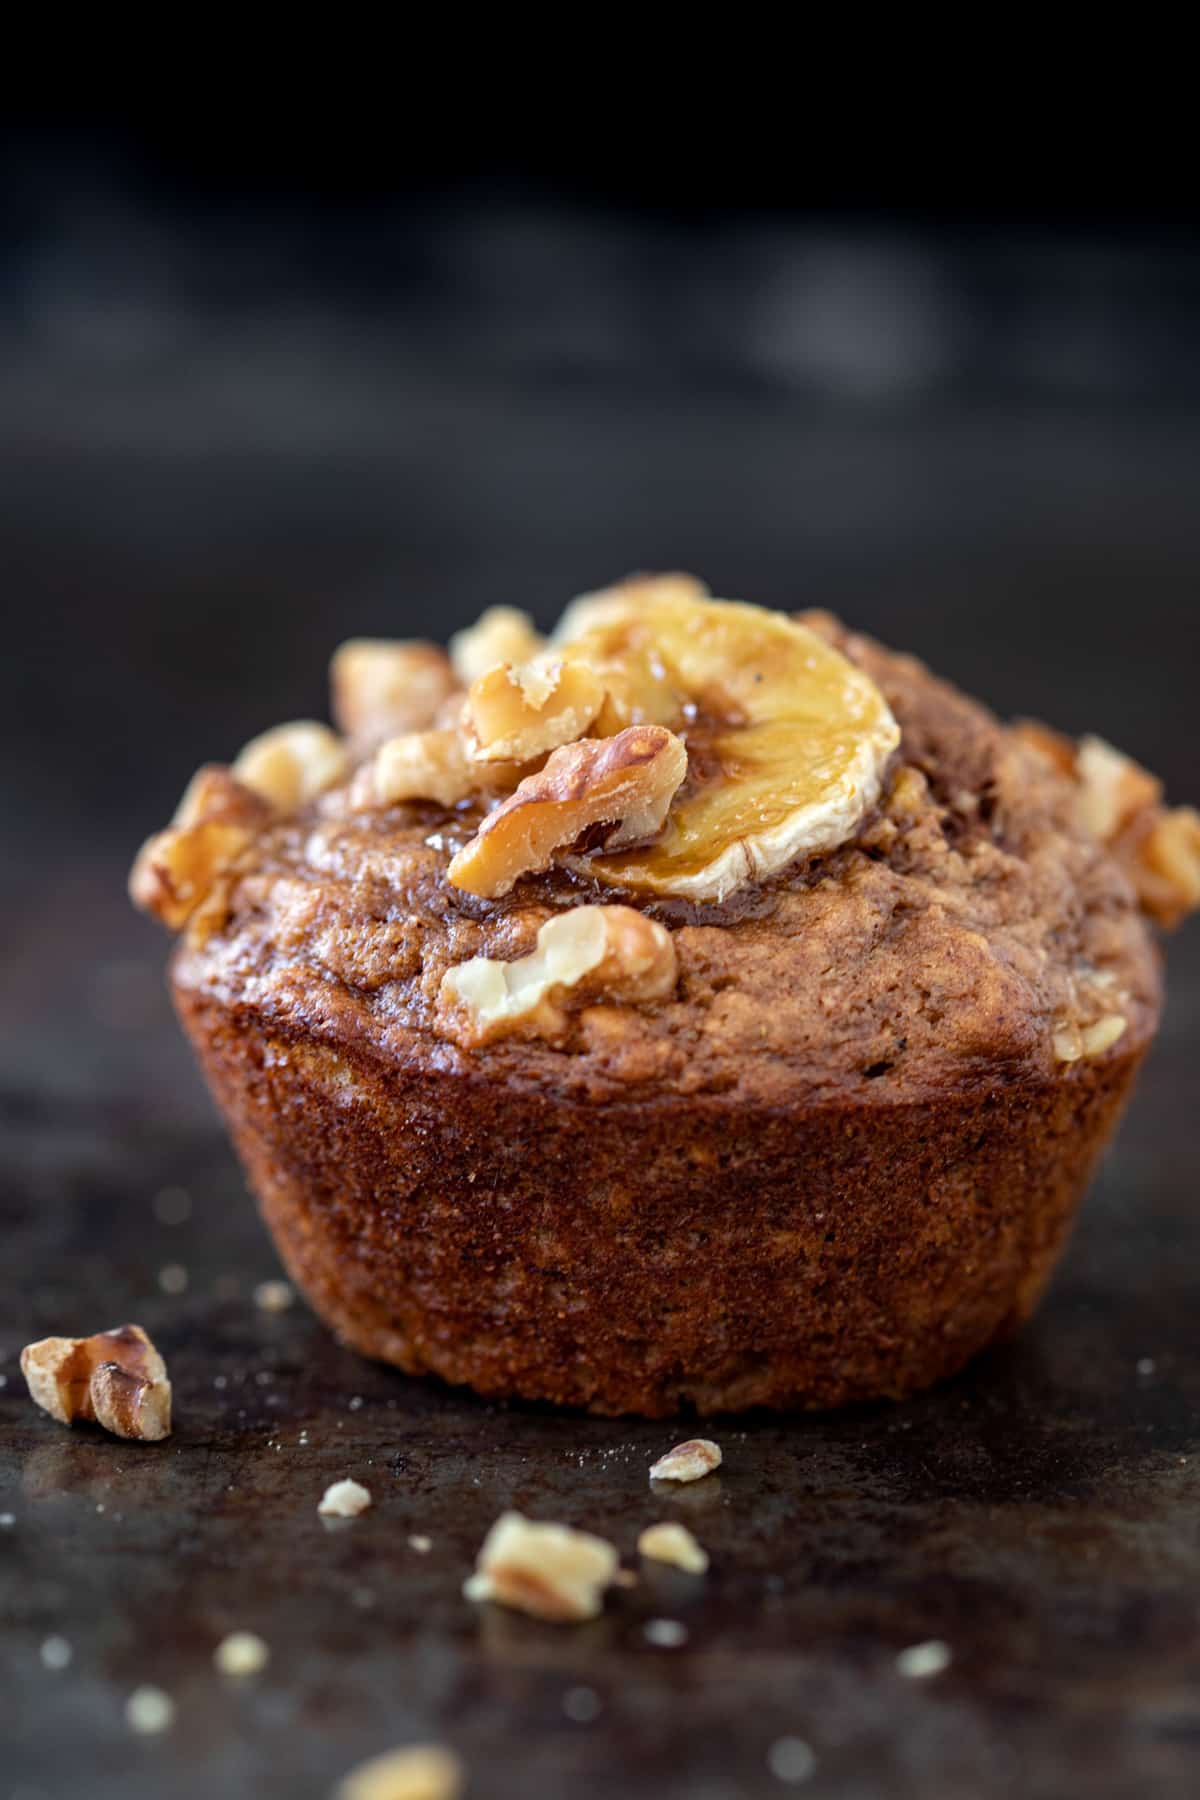 Banana nut muffin topped with salted maple walnuts and a banana slice.